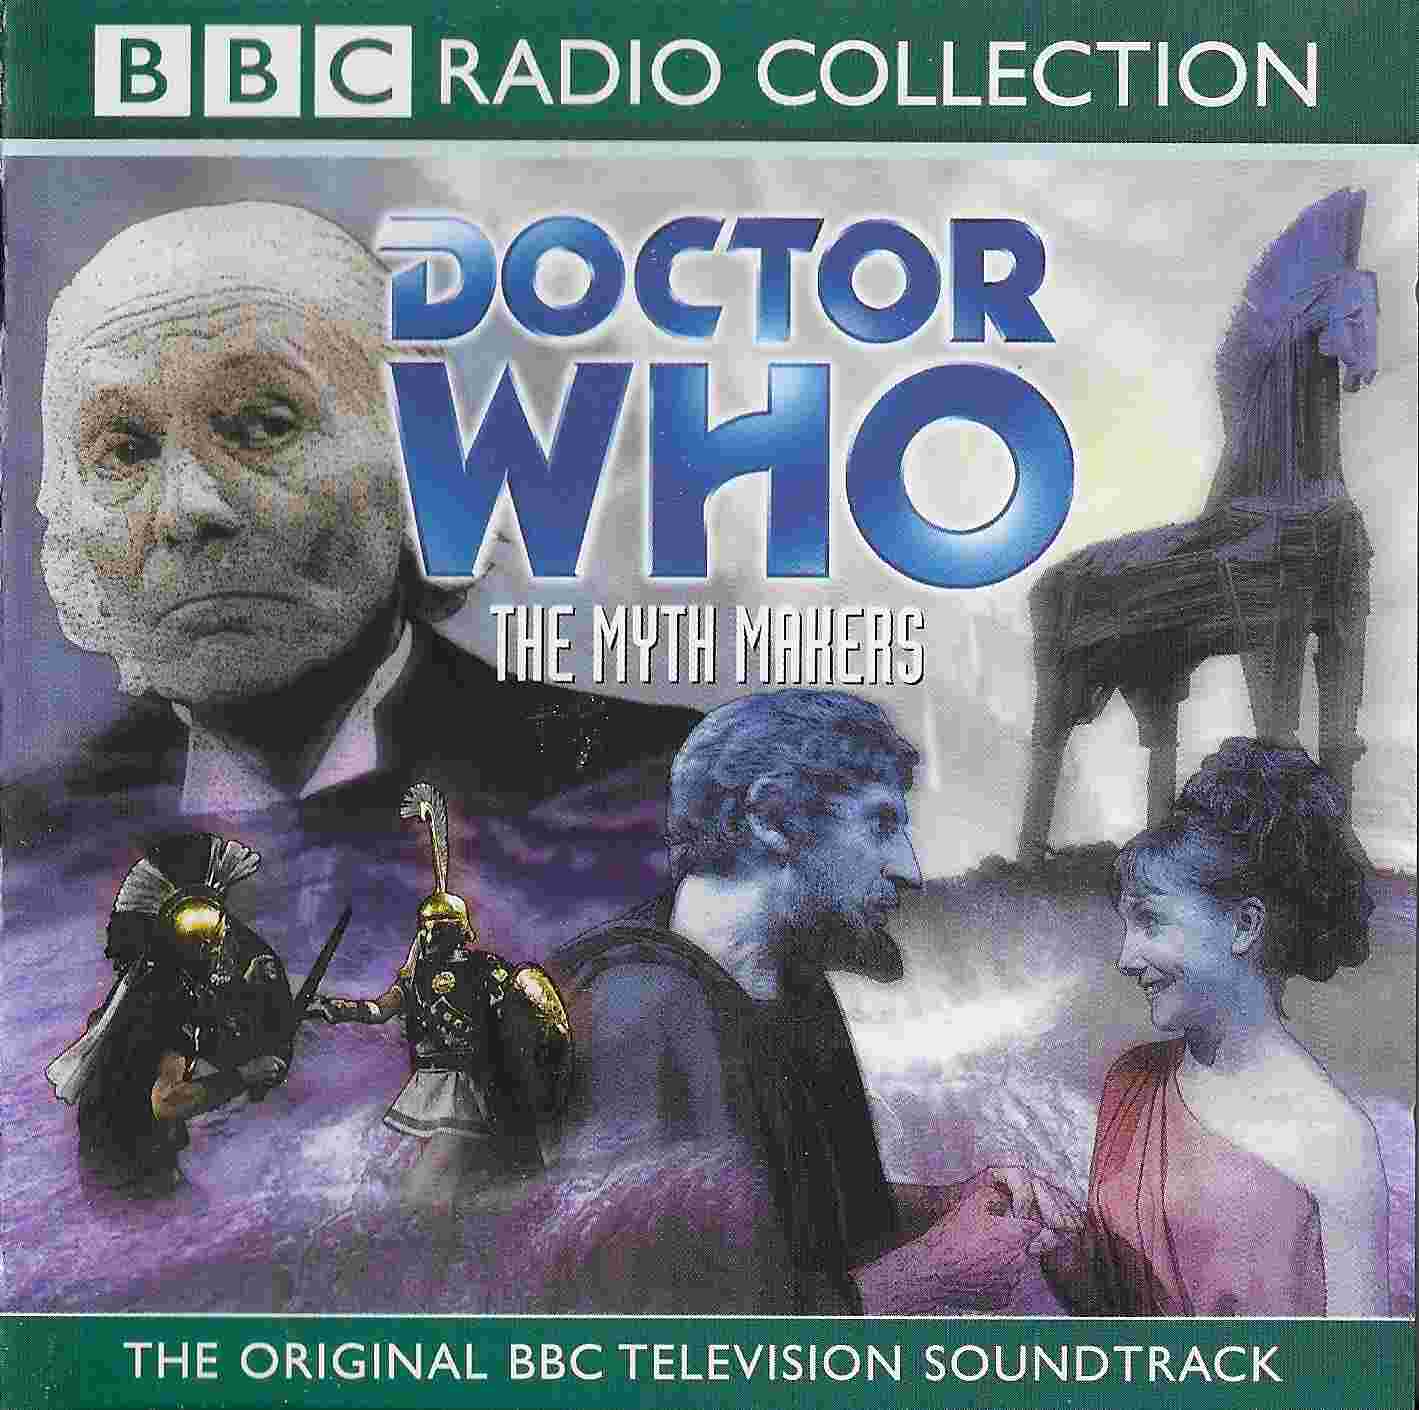 Picture of ISBN 0-563-47777-6 Doctor Who - The myth makers by artist Donald Cotton from the BBC cds - Records and Tapes library